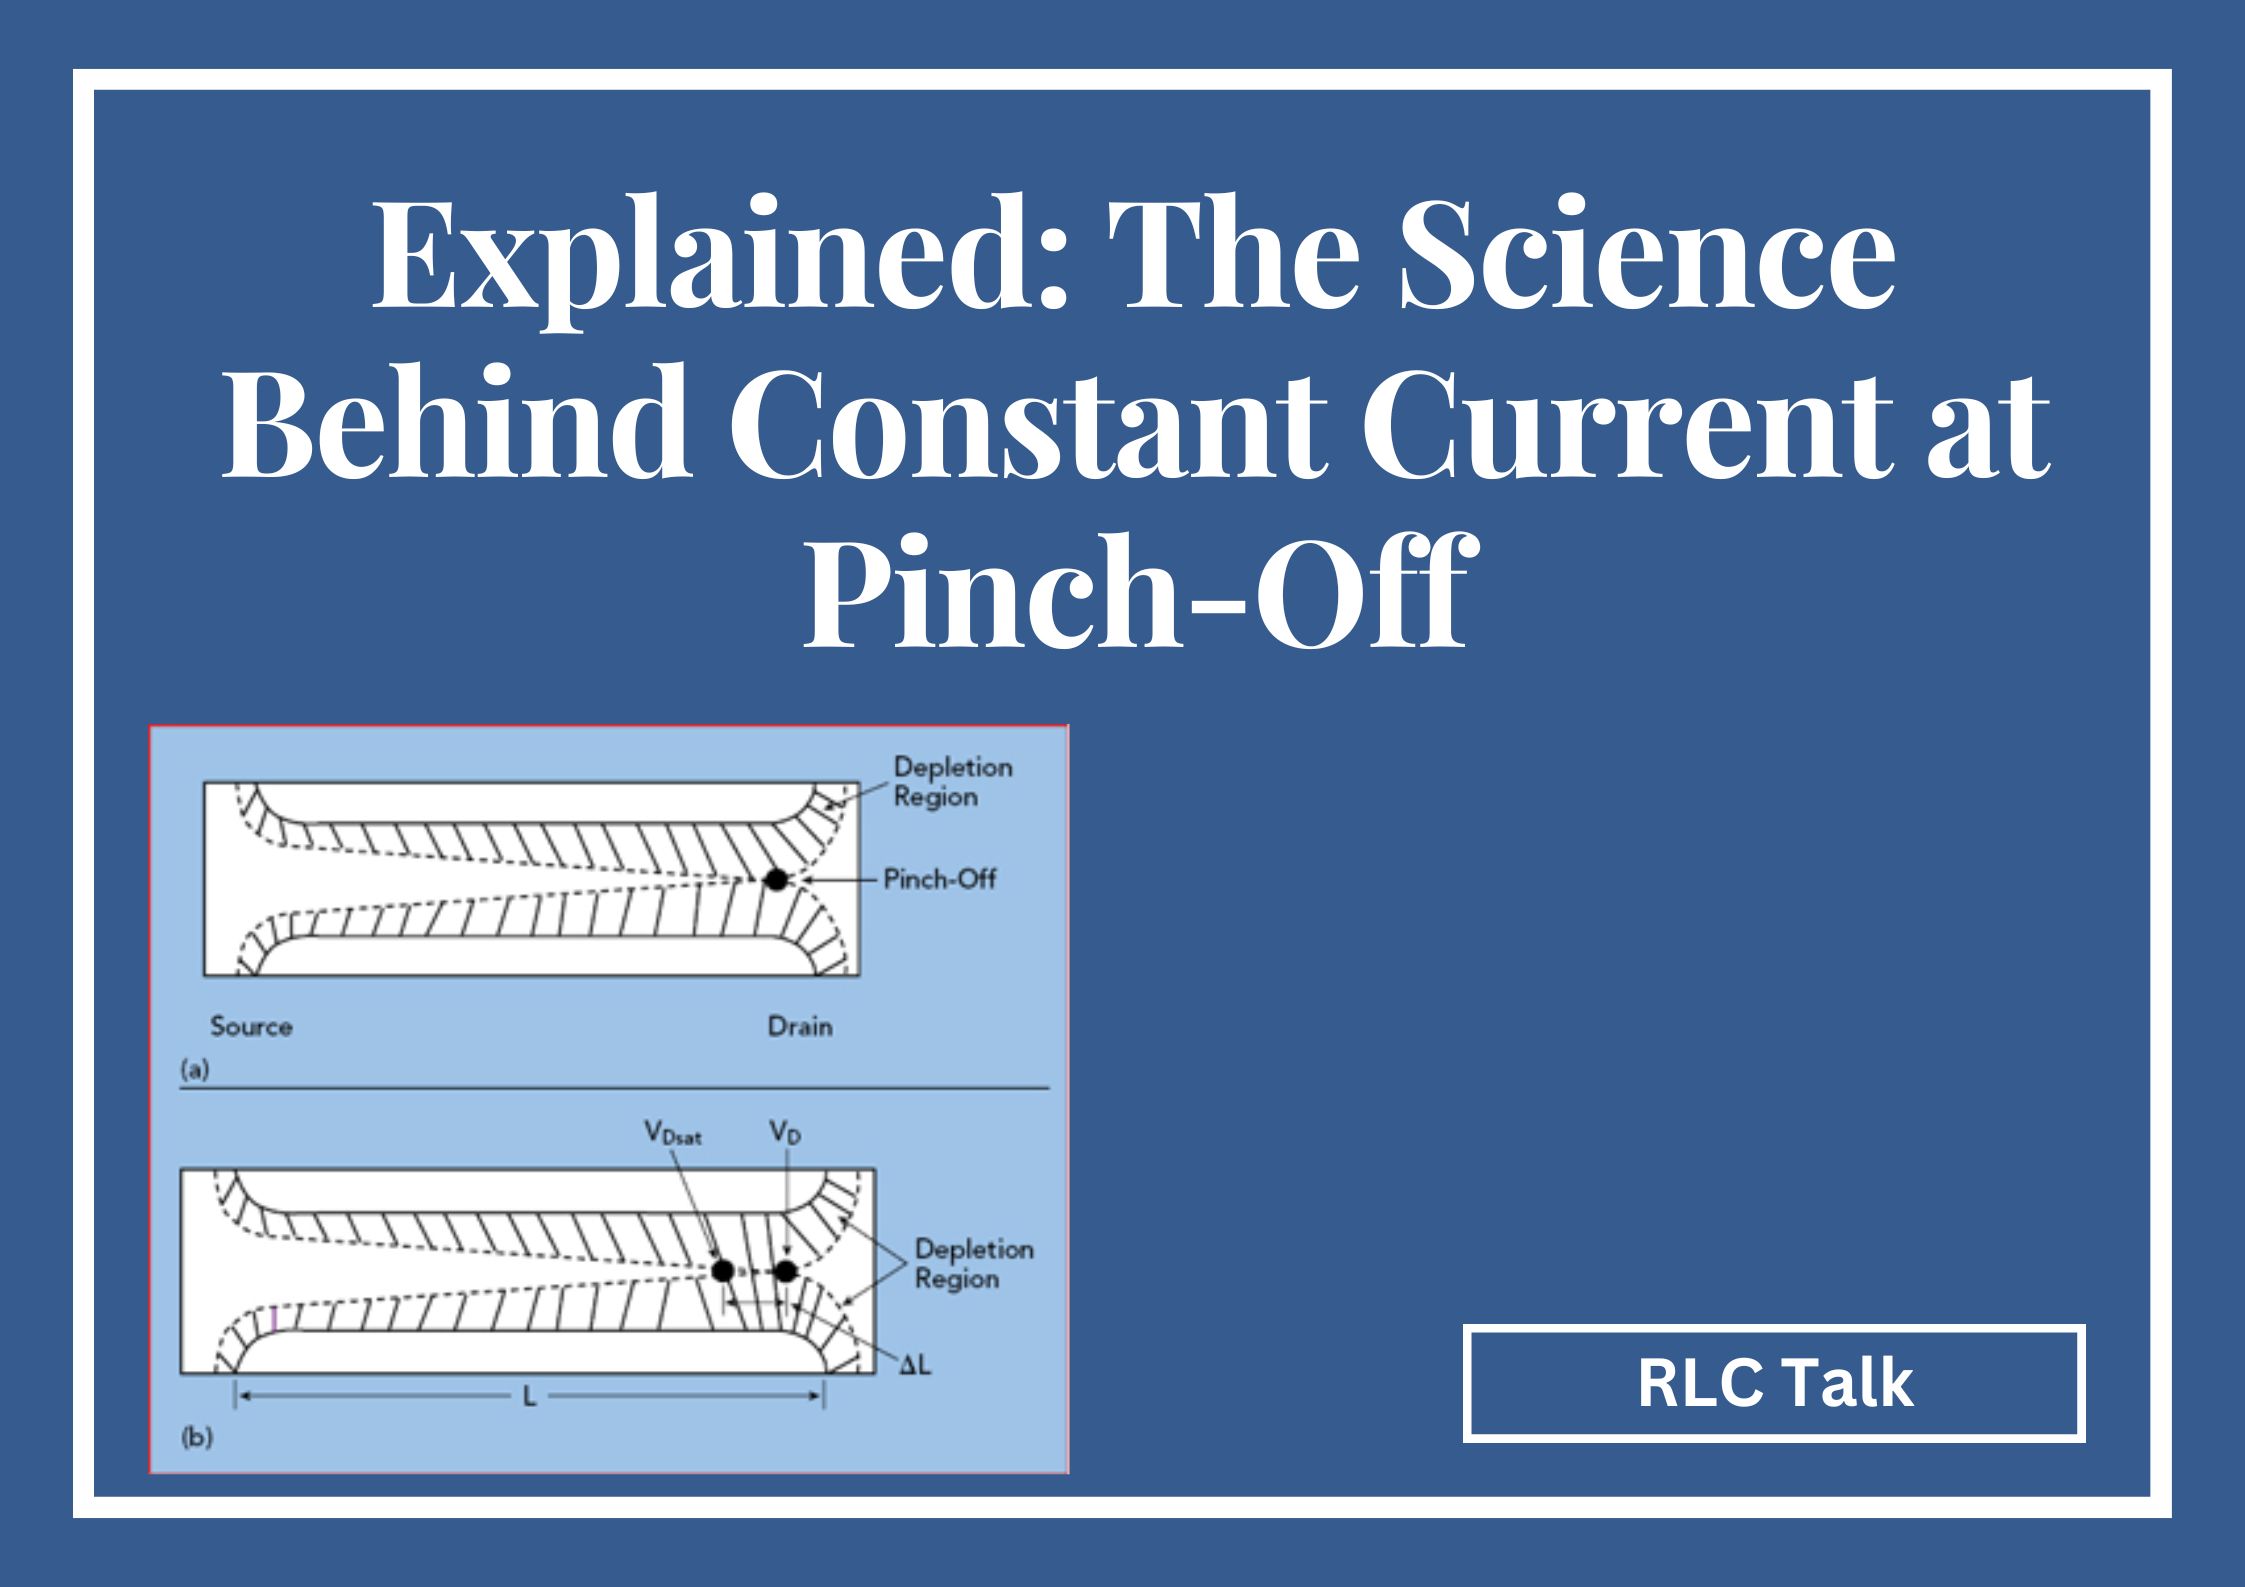 why current is constant at pinch off